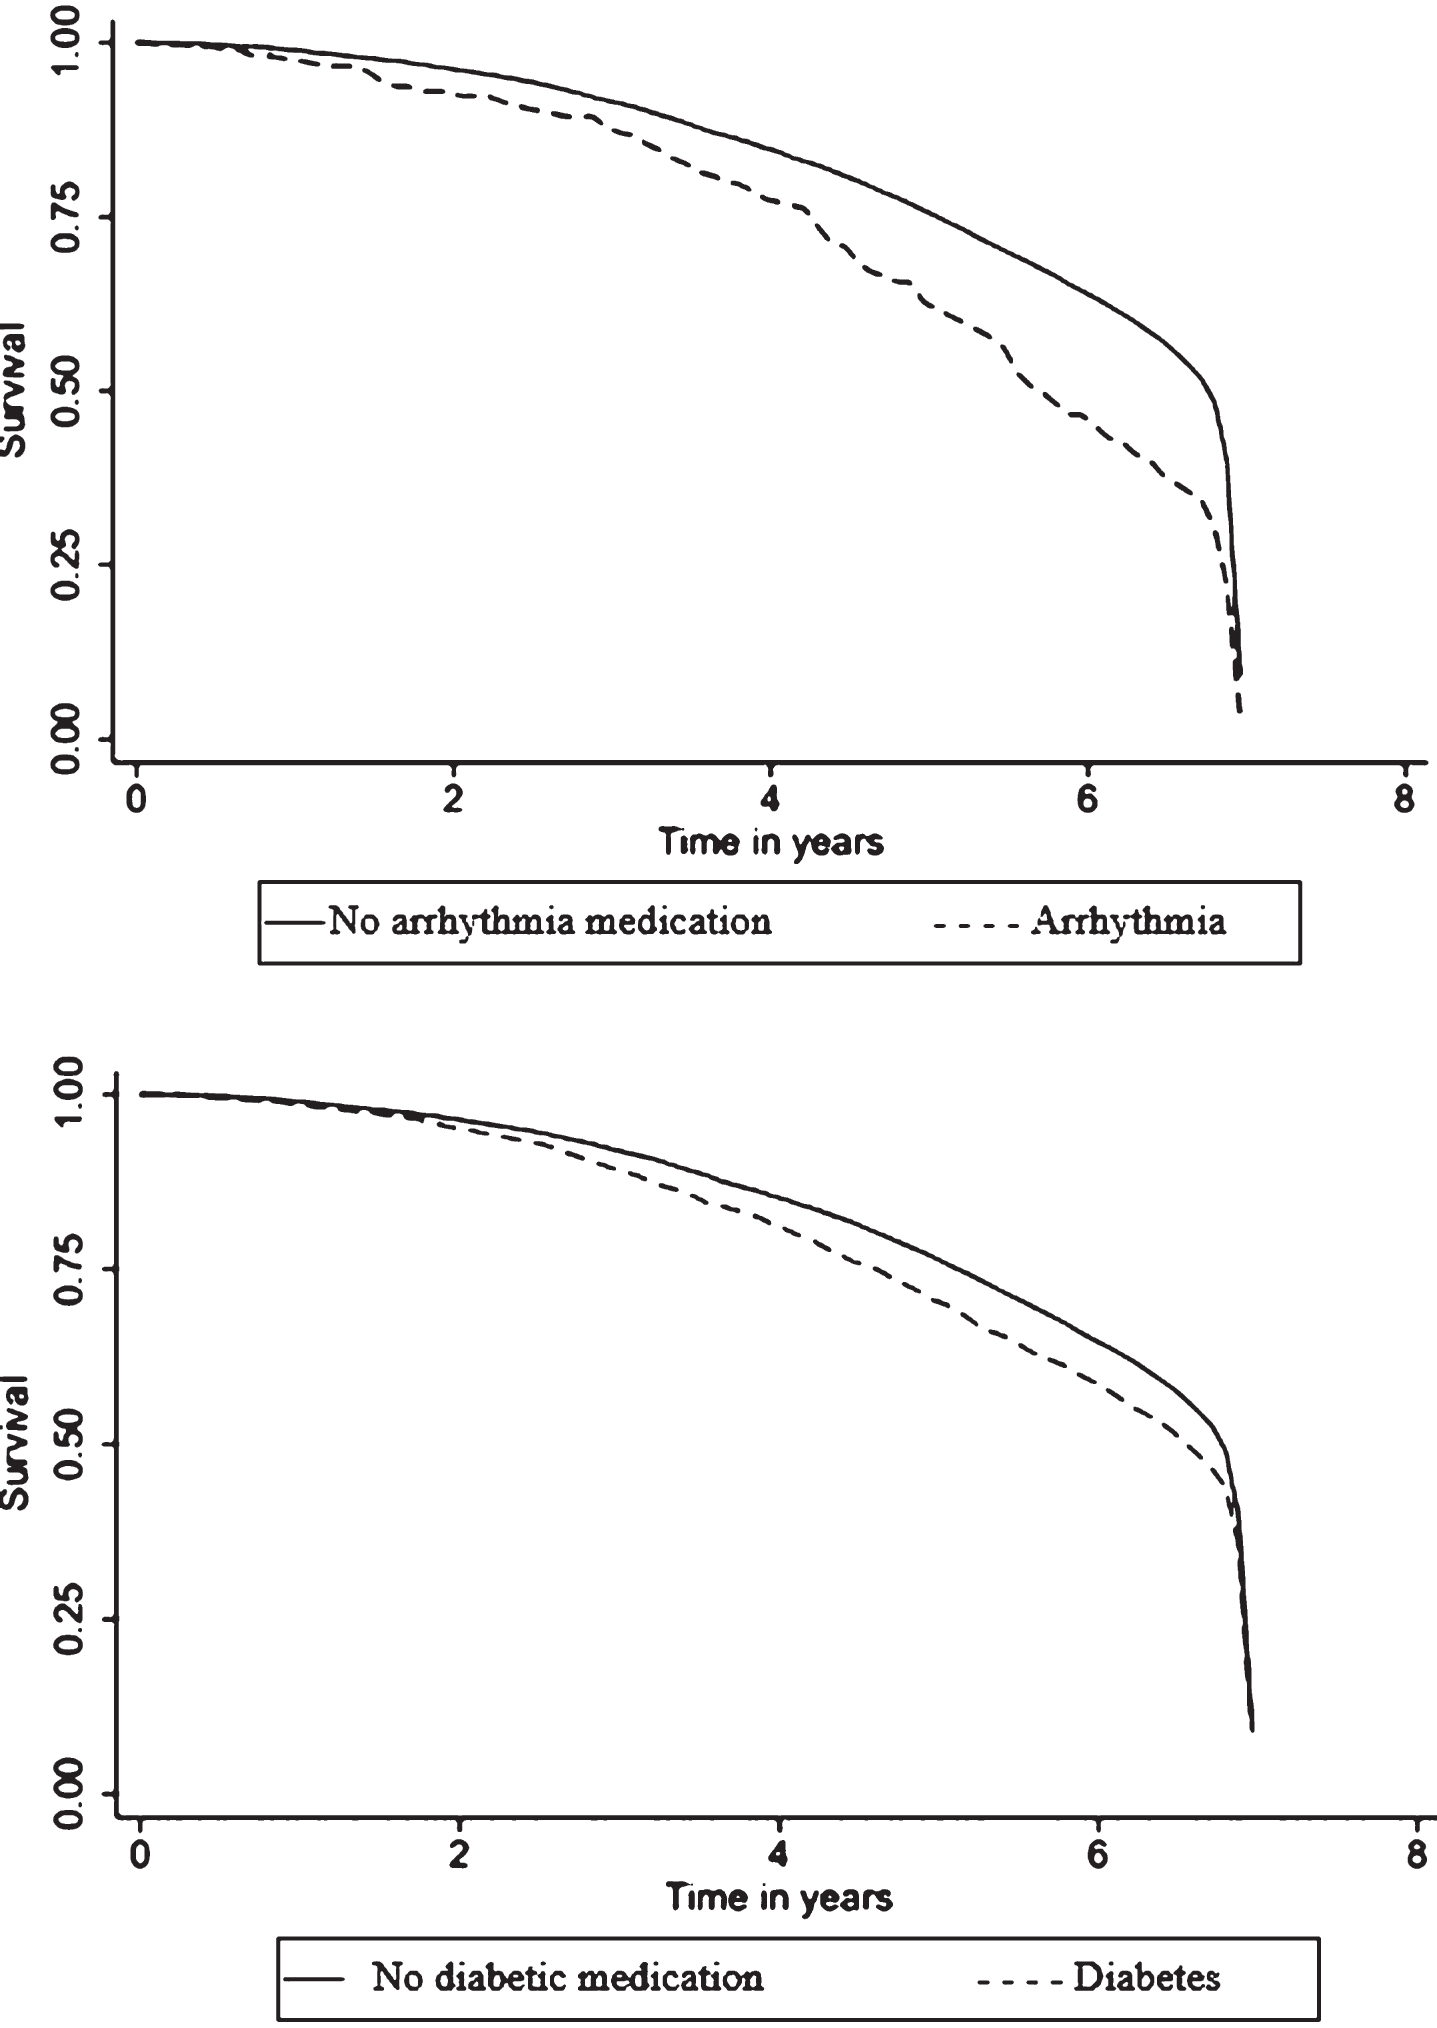 Survival function derived from cox proportional hazard regression adjusted for covariates in Table 3. Y axis denotes estimated survival percentages. X axis is time in years. Of the different classes of medication extracted from the enhanced prescribing database, only anti-arrhythmic and diabetic medication significantly increased mortality rates among people prescribed anti-dementia drugs in our study population.